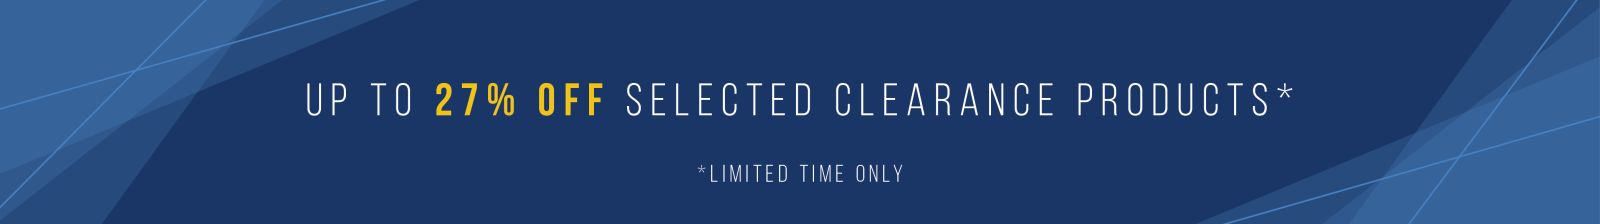 Up to 27% off selected clearance products. Limited Time Only